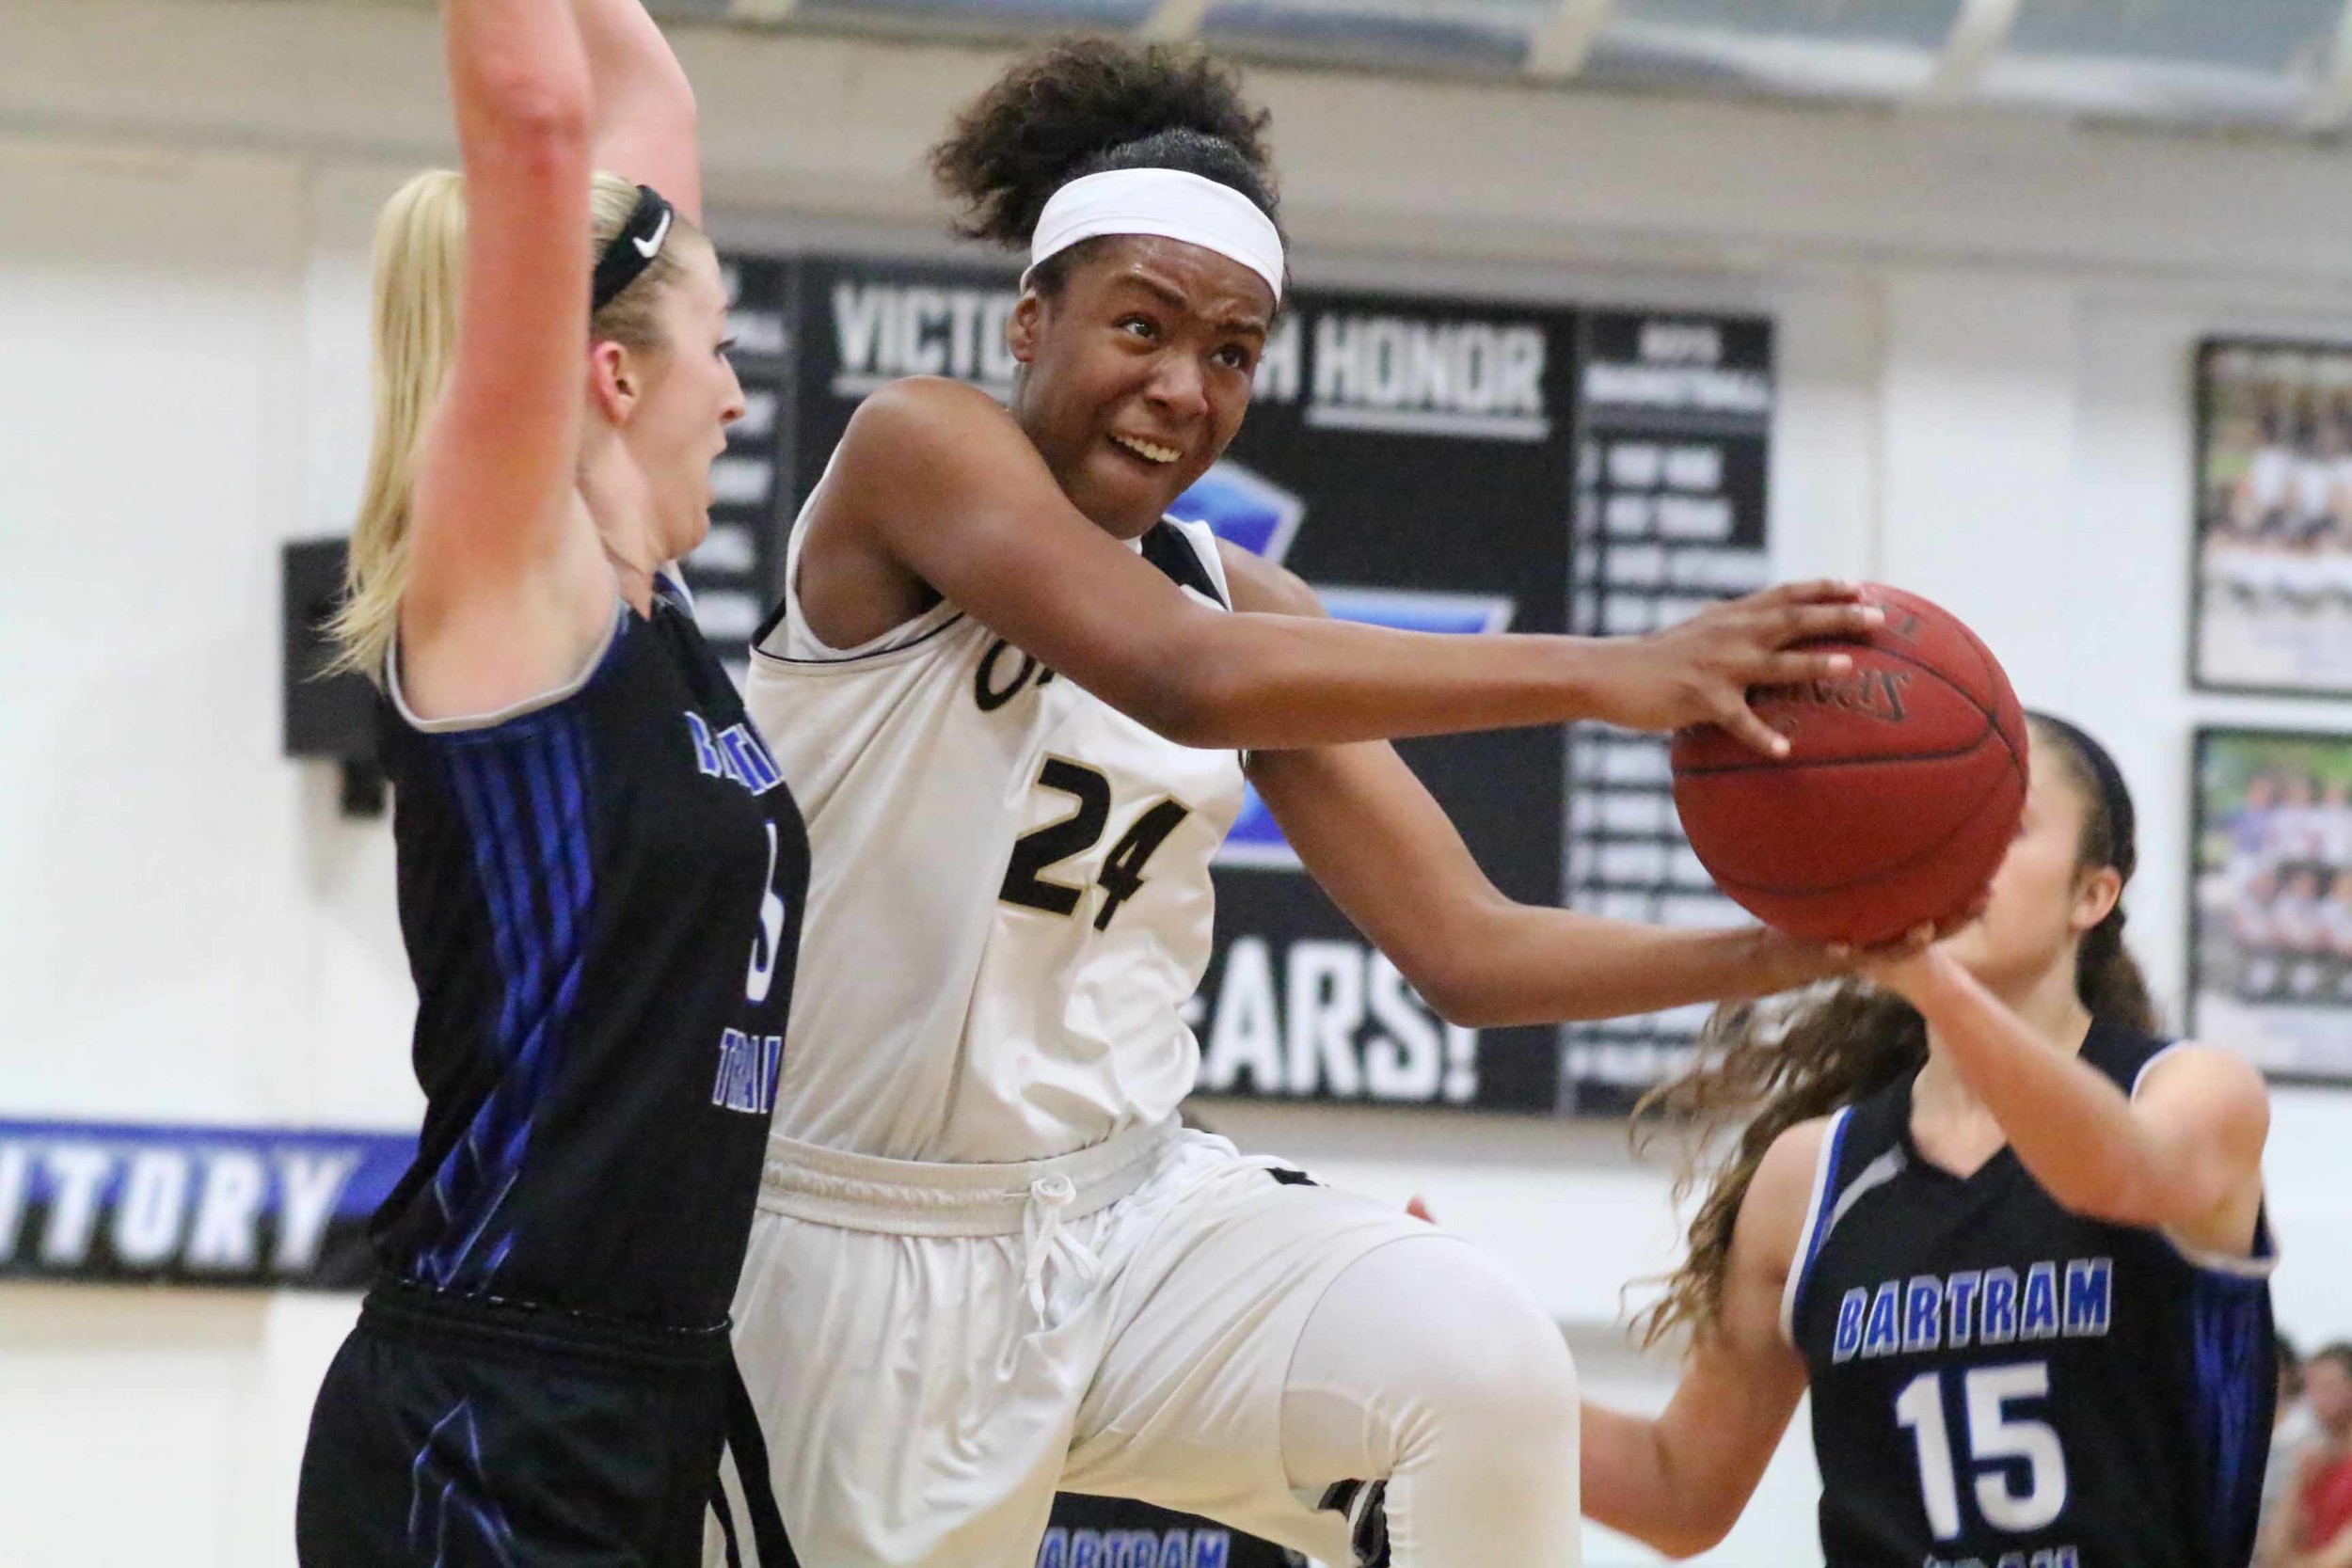 Oakleaf High senior center Jade Lewis powers for points in key district game against Bartram Trail. Lewis heads to the University of Miami in the fall.